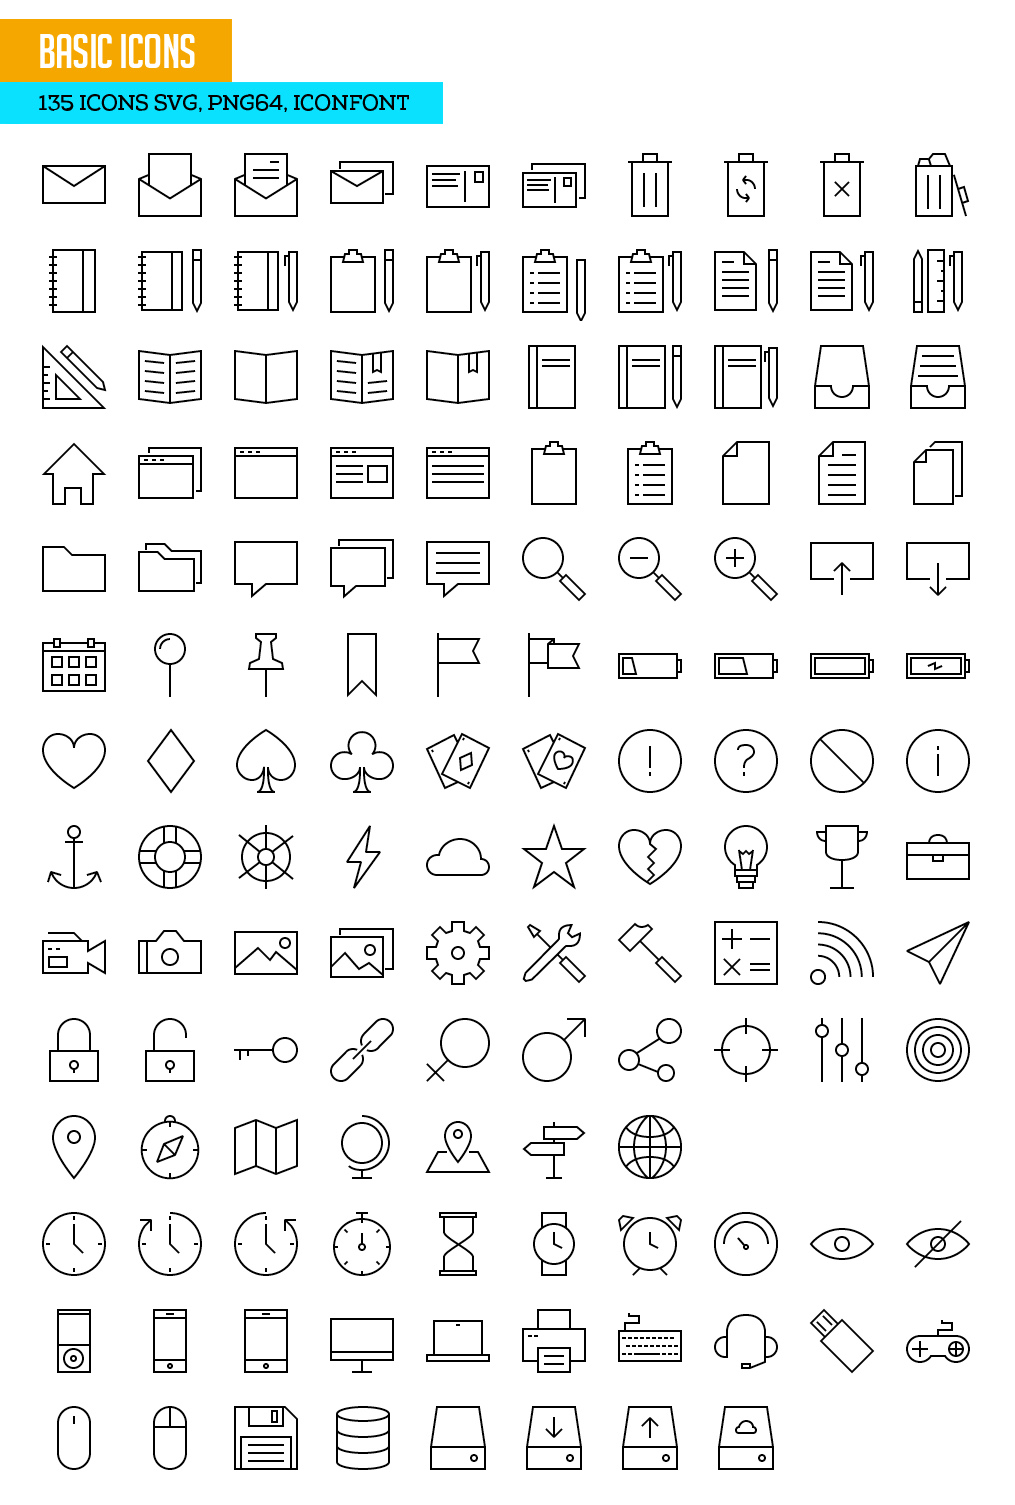 Download 730 Free Outline Icons Set For Designers Icons Graphic Design Junction